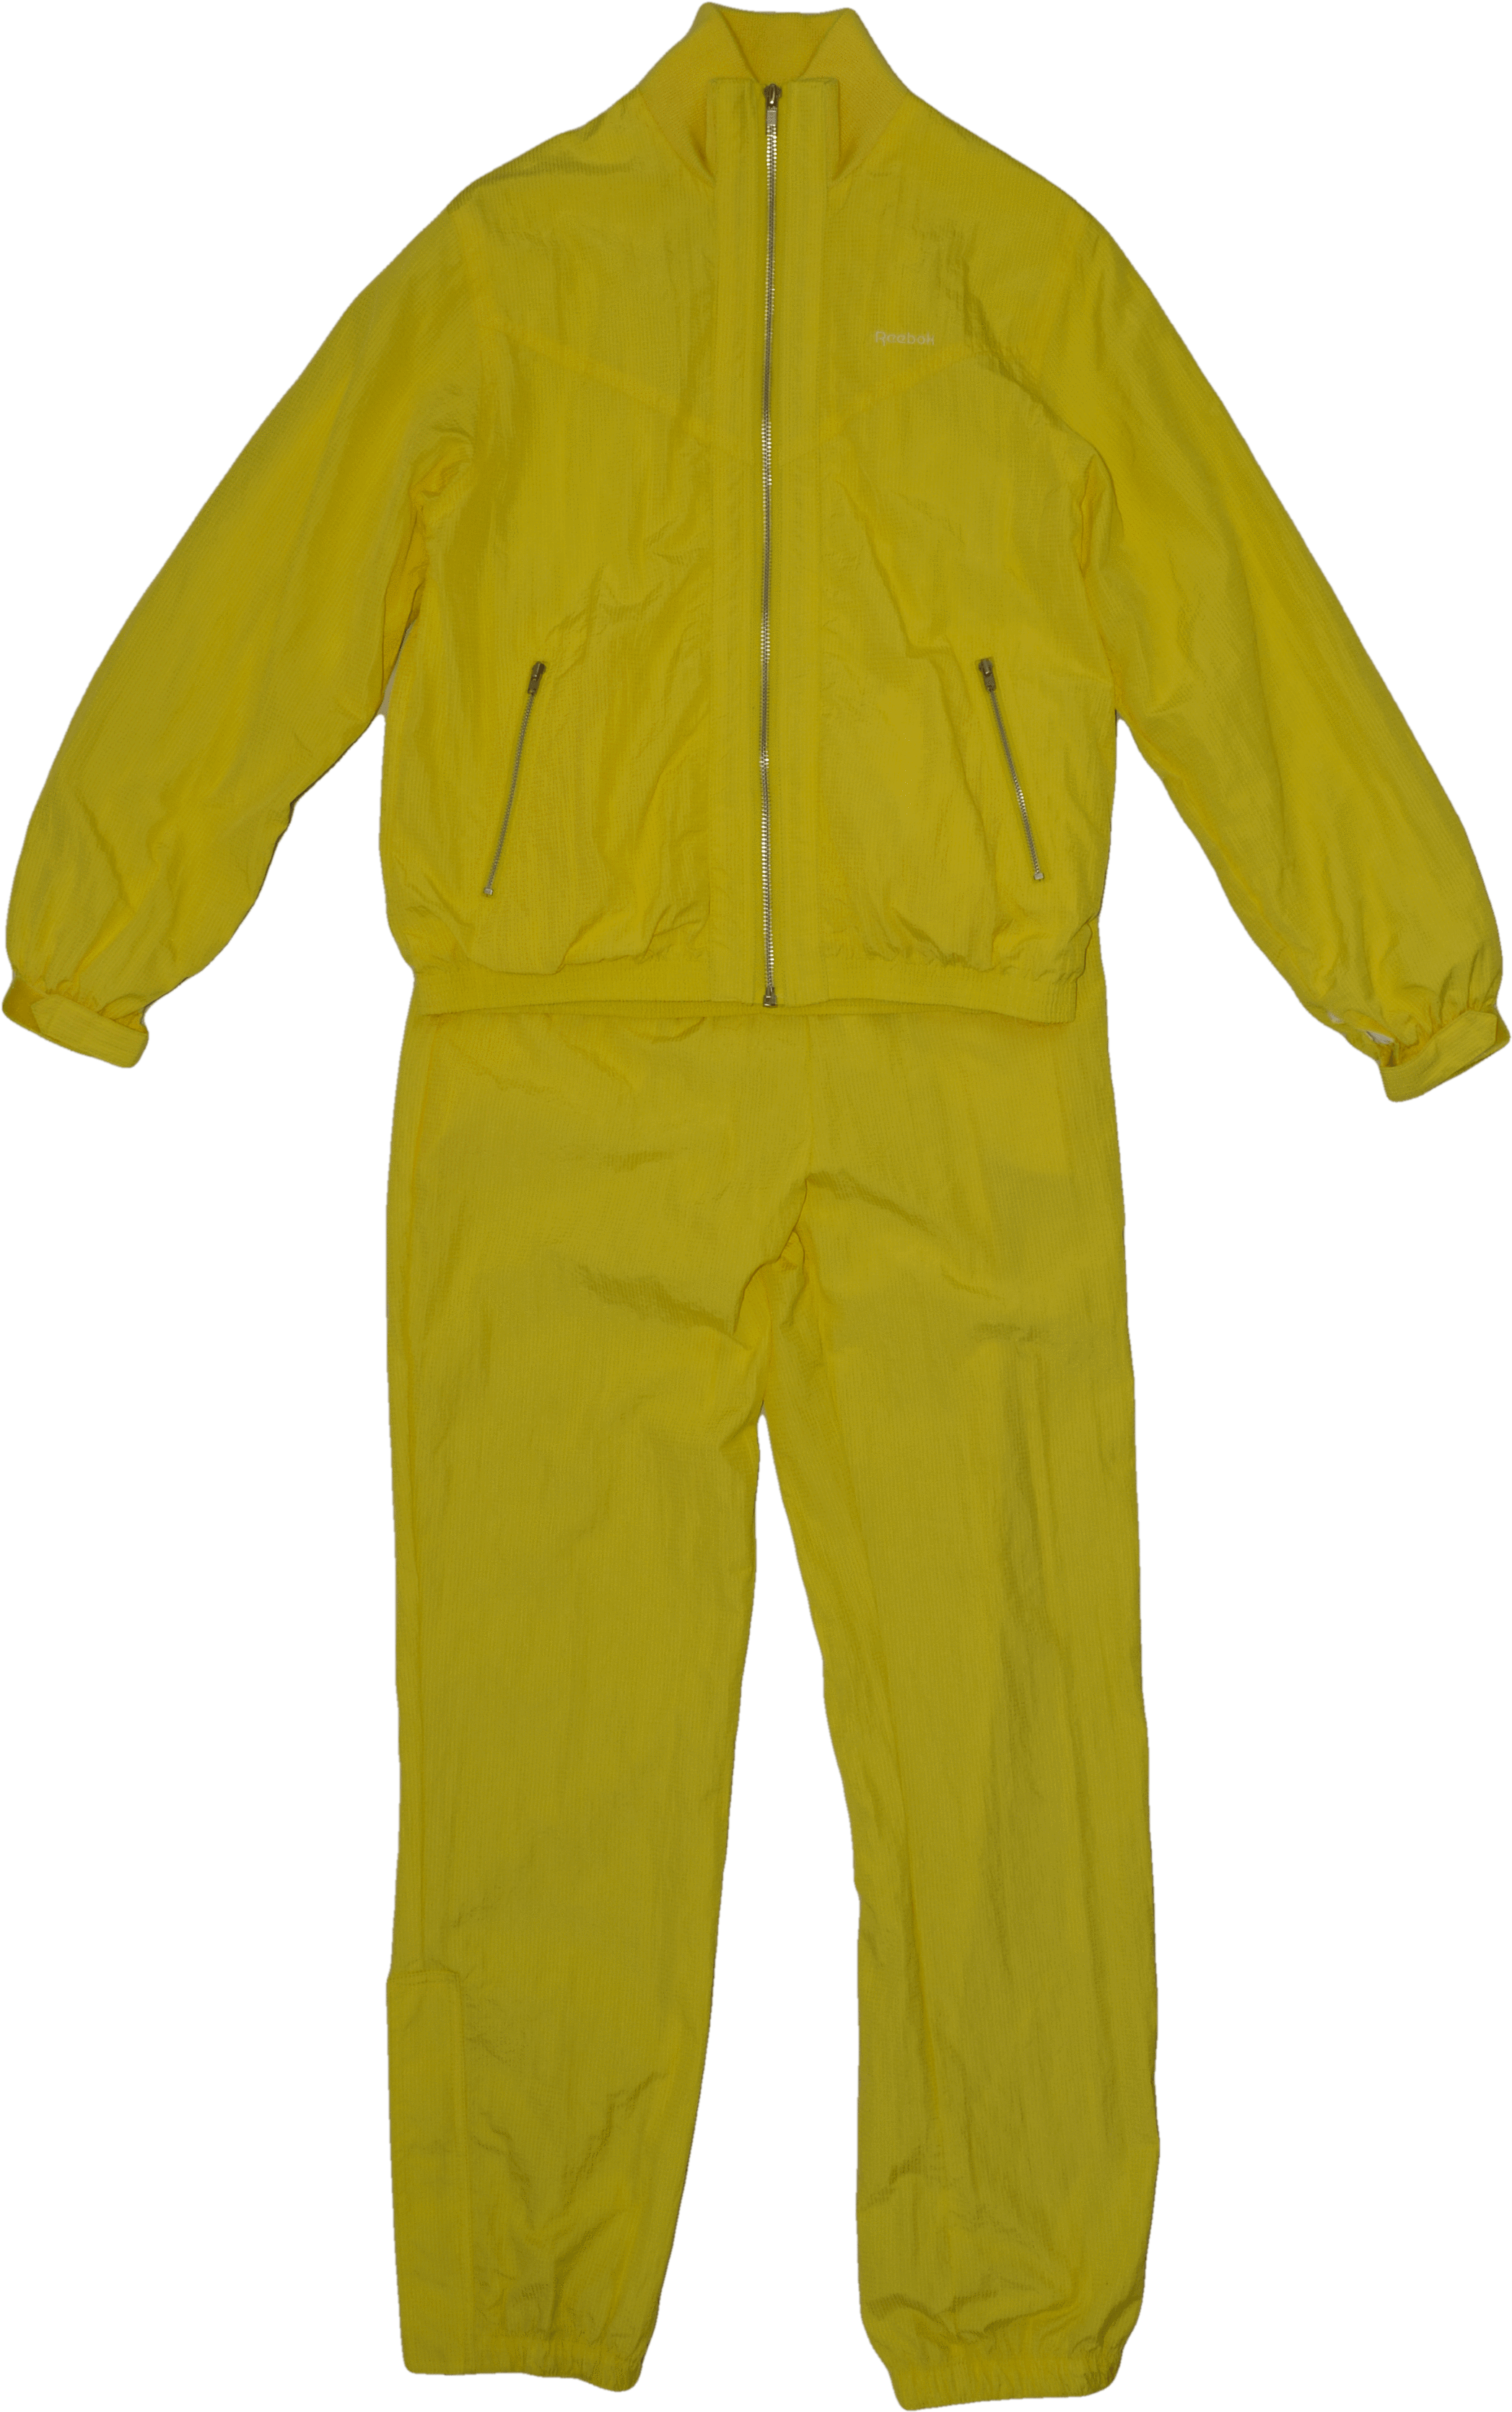 A Yellow Tracksuit With Zippers